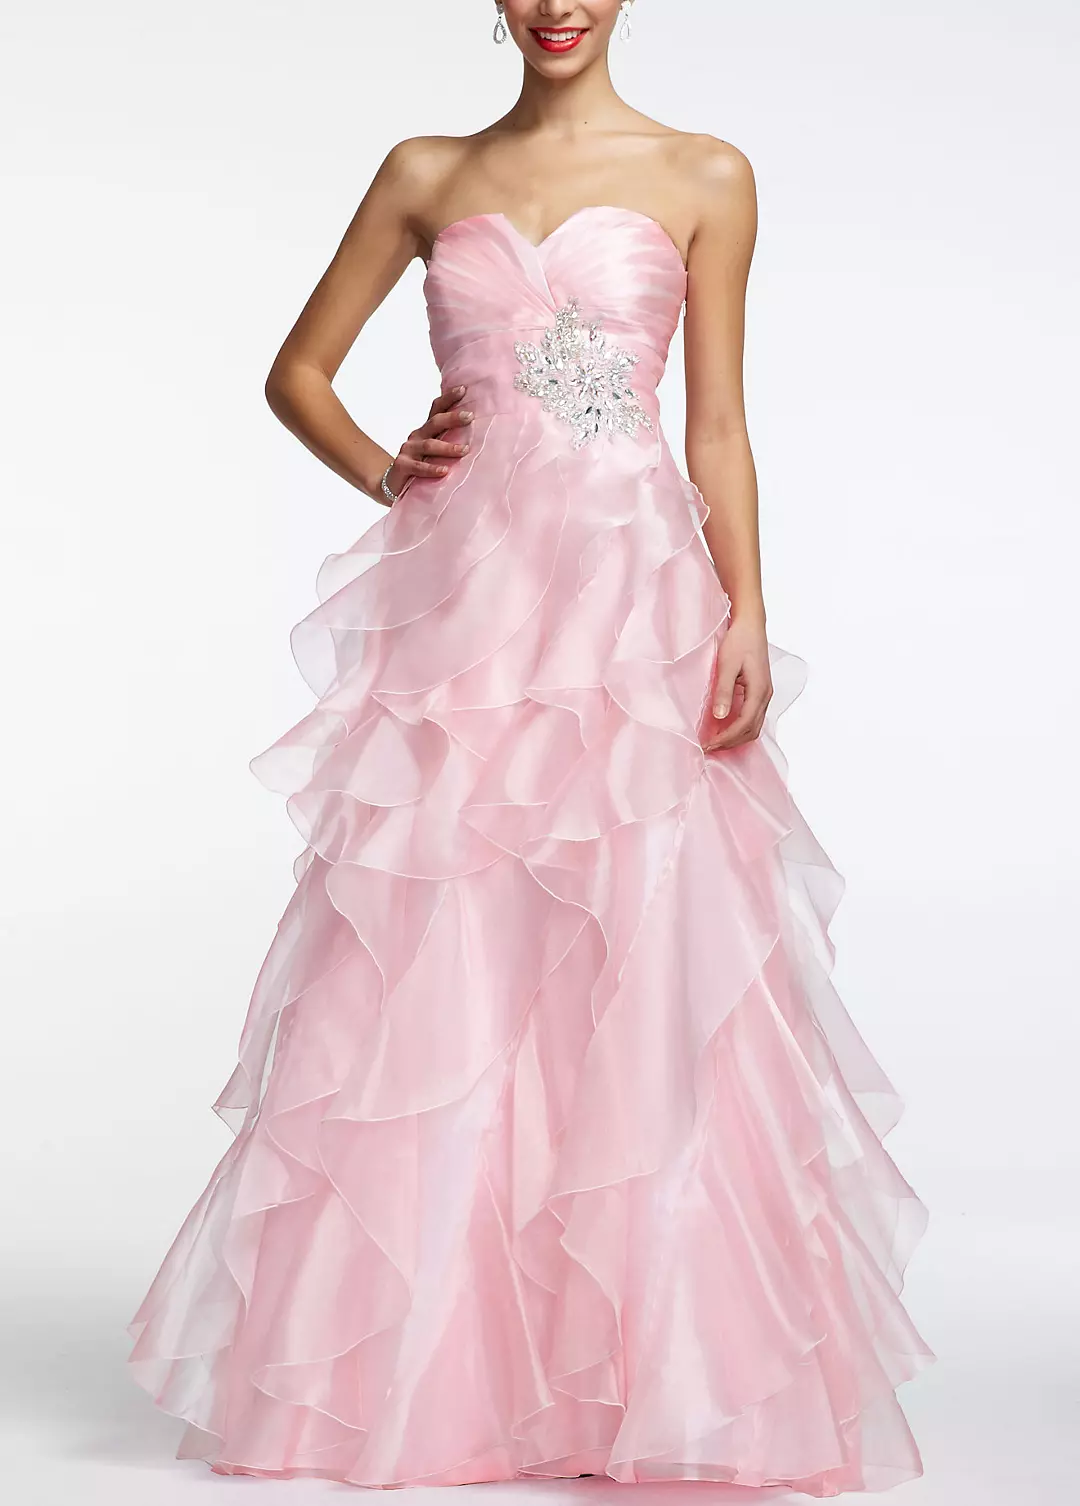 Strapless Organza Prom Ball Gown with Ruffles Image